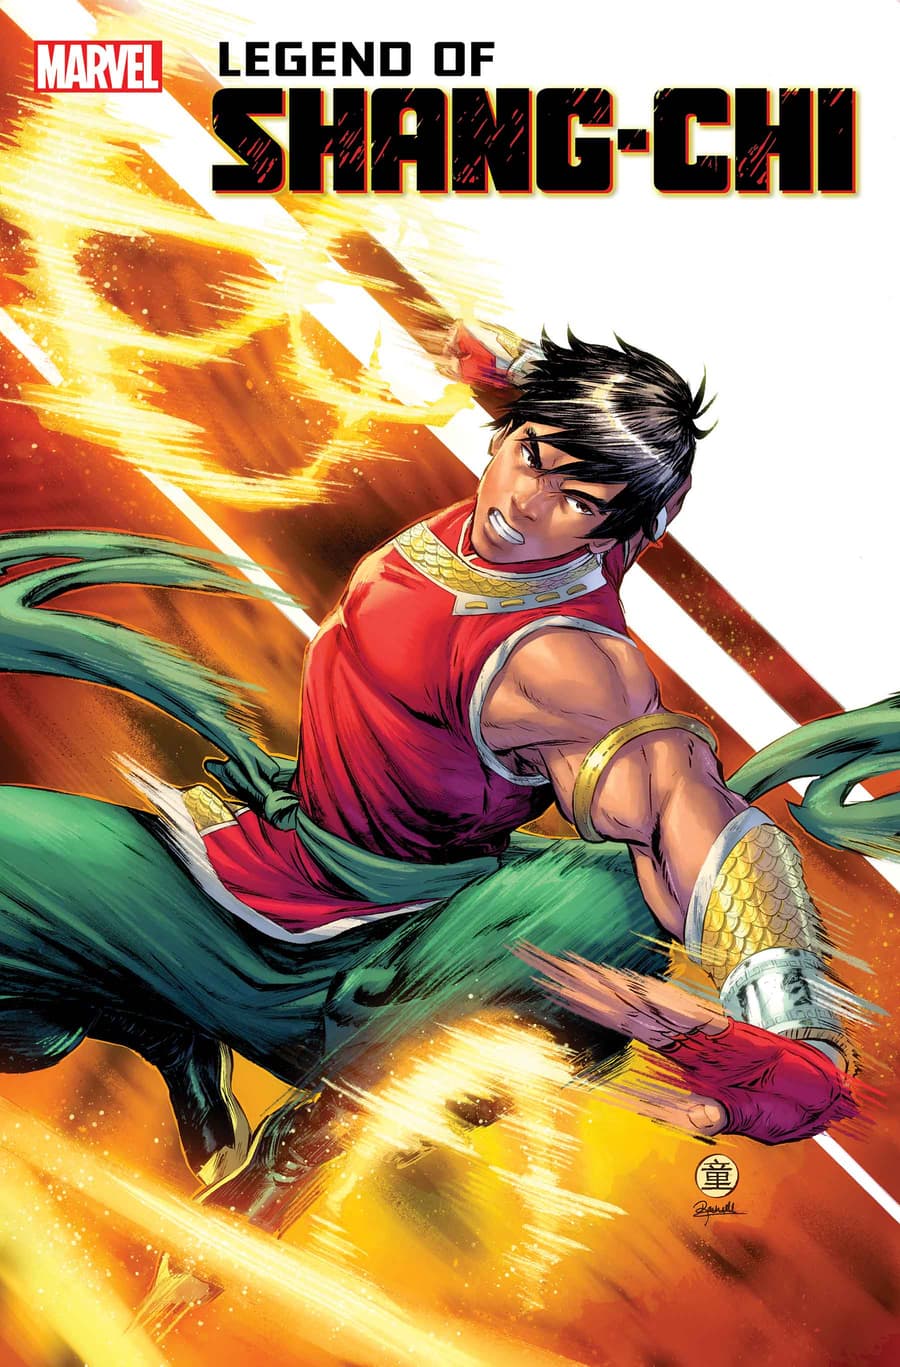 LEGEND OF SHANG-CHI #1 cover by Andie Tong